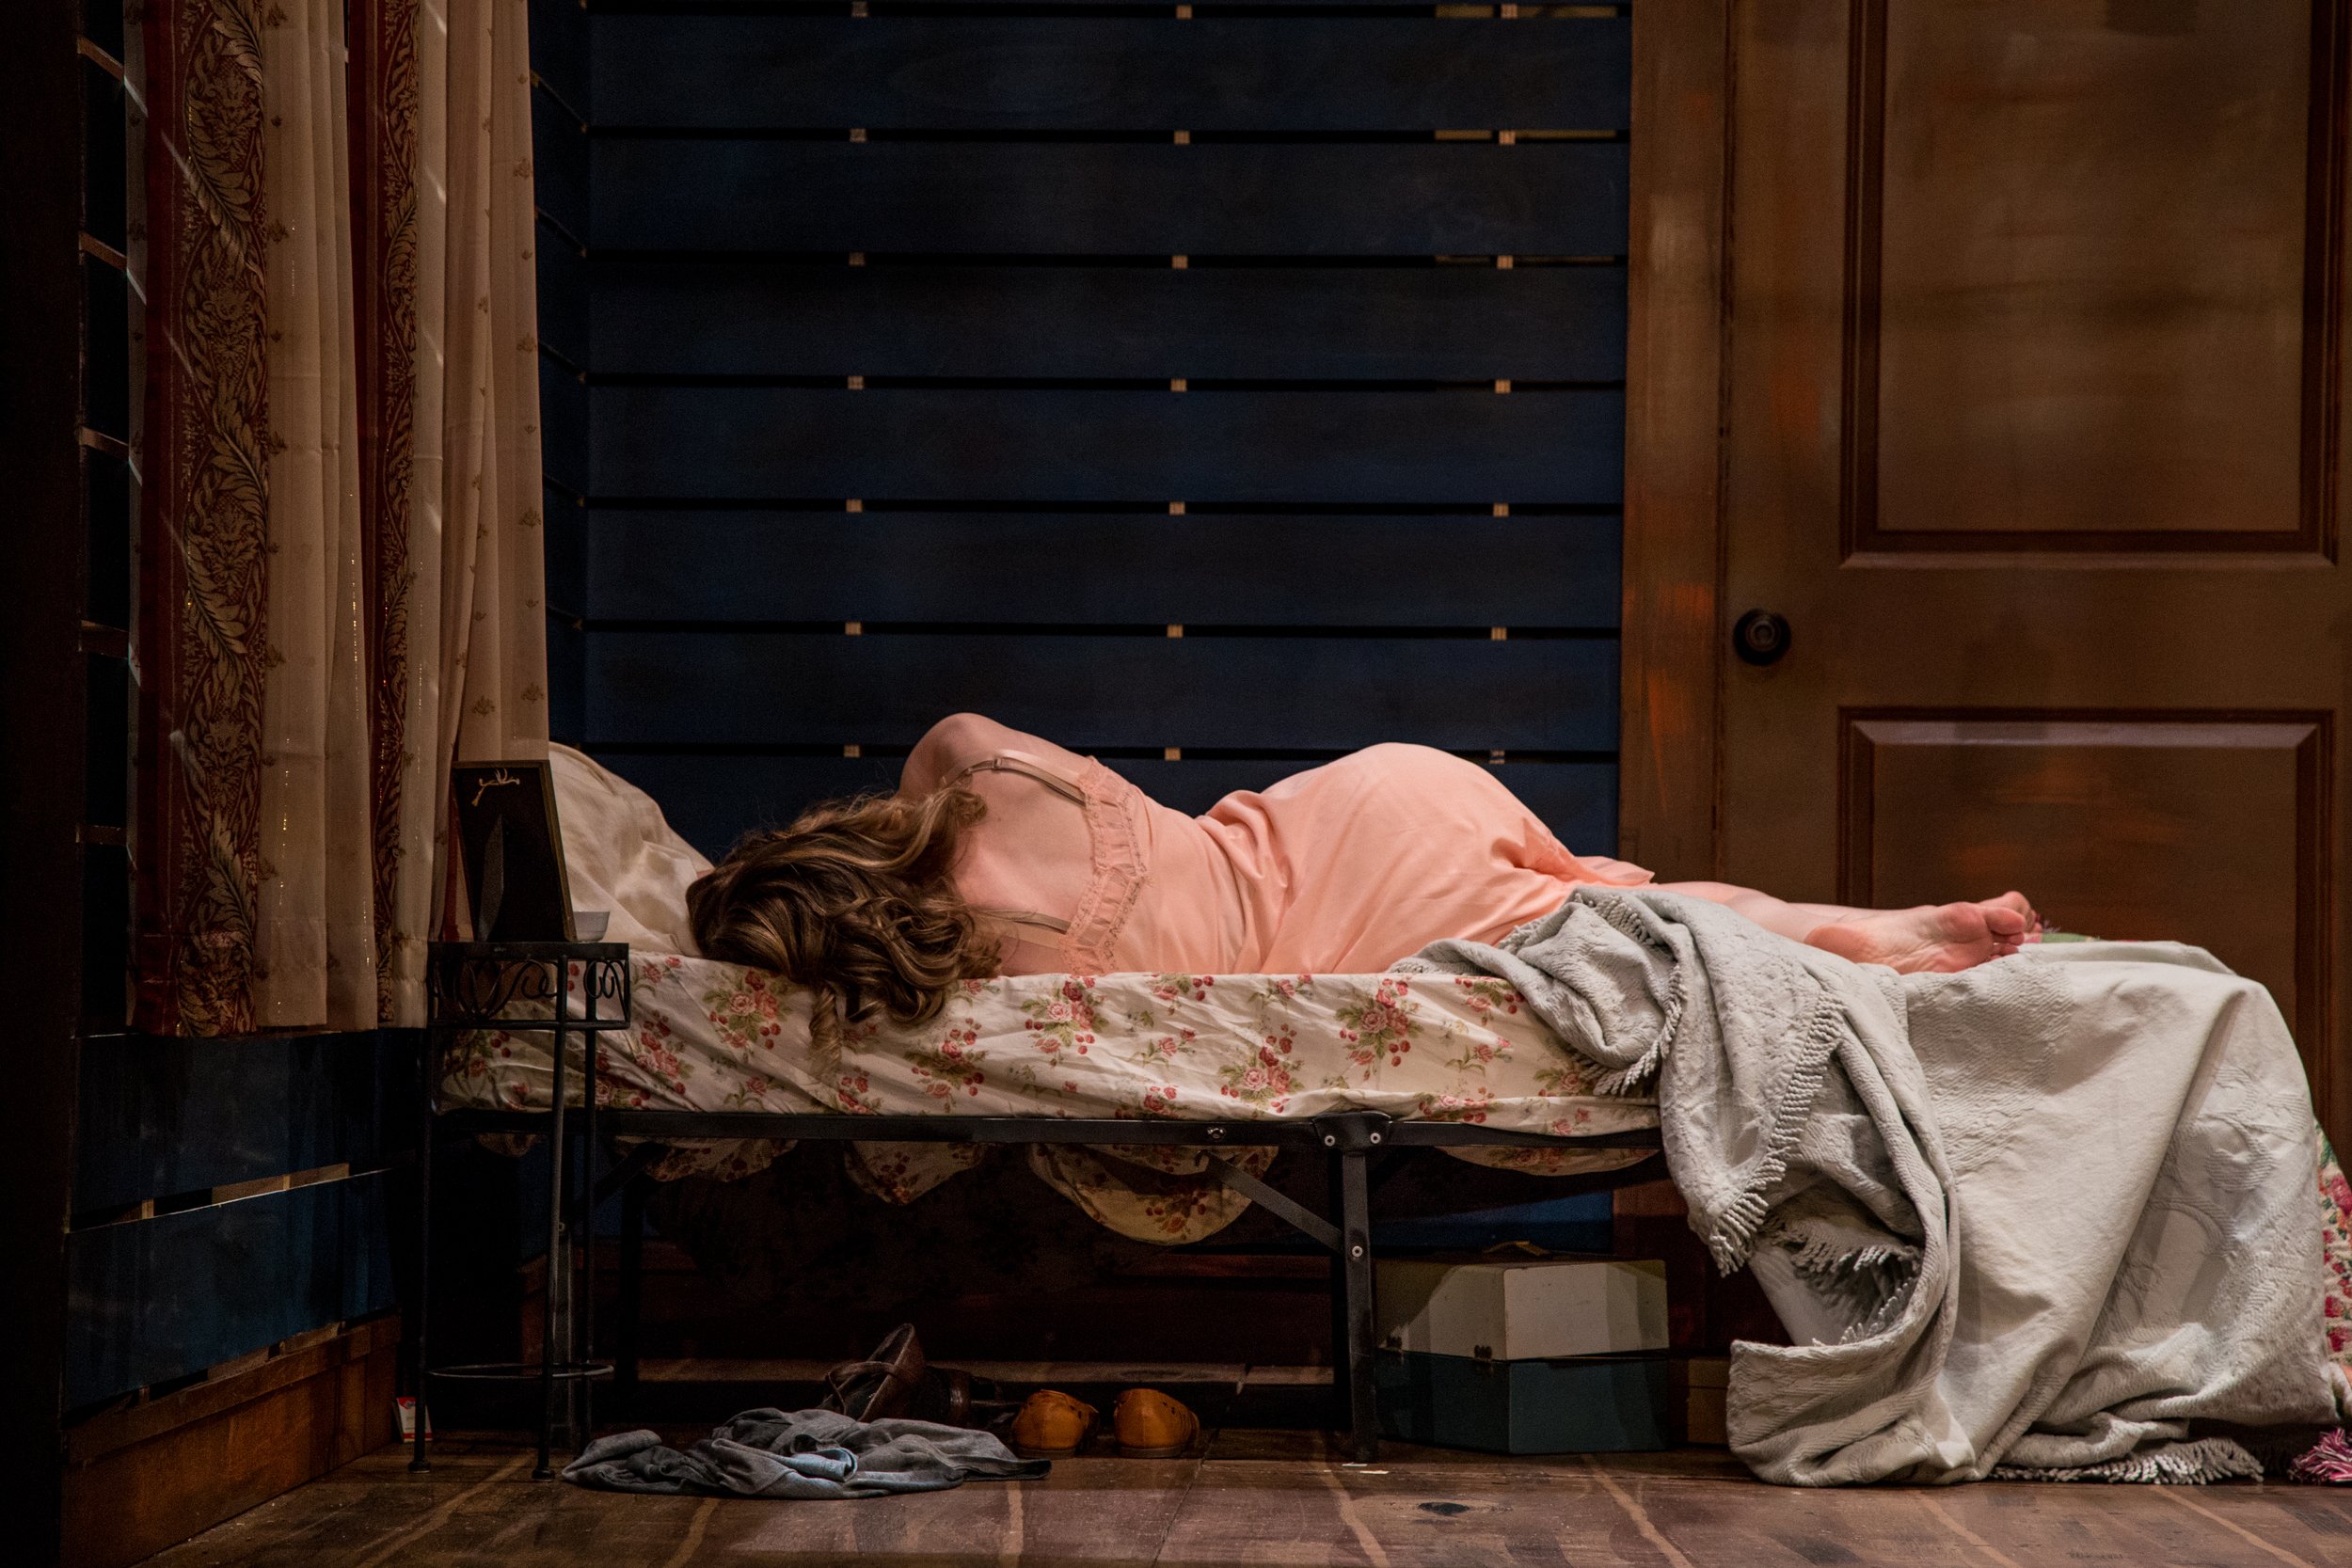  A Streetcar Named Desire / Theatre Buford / 2019 